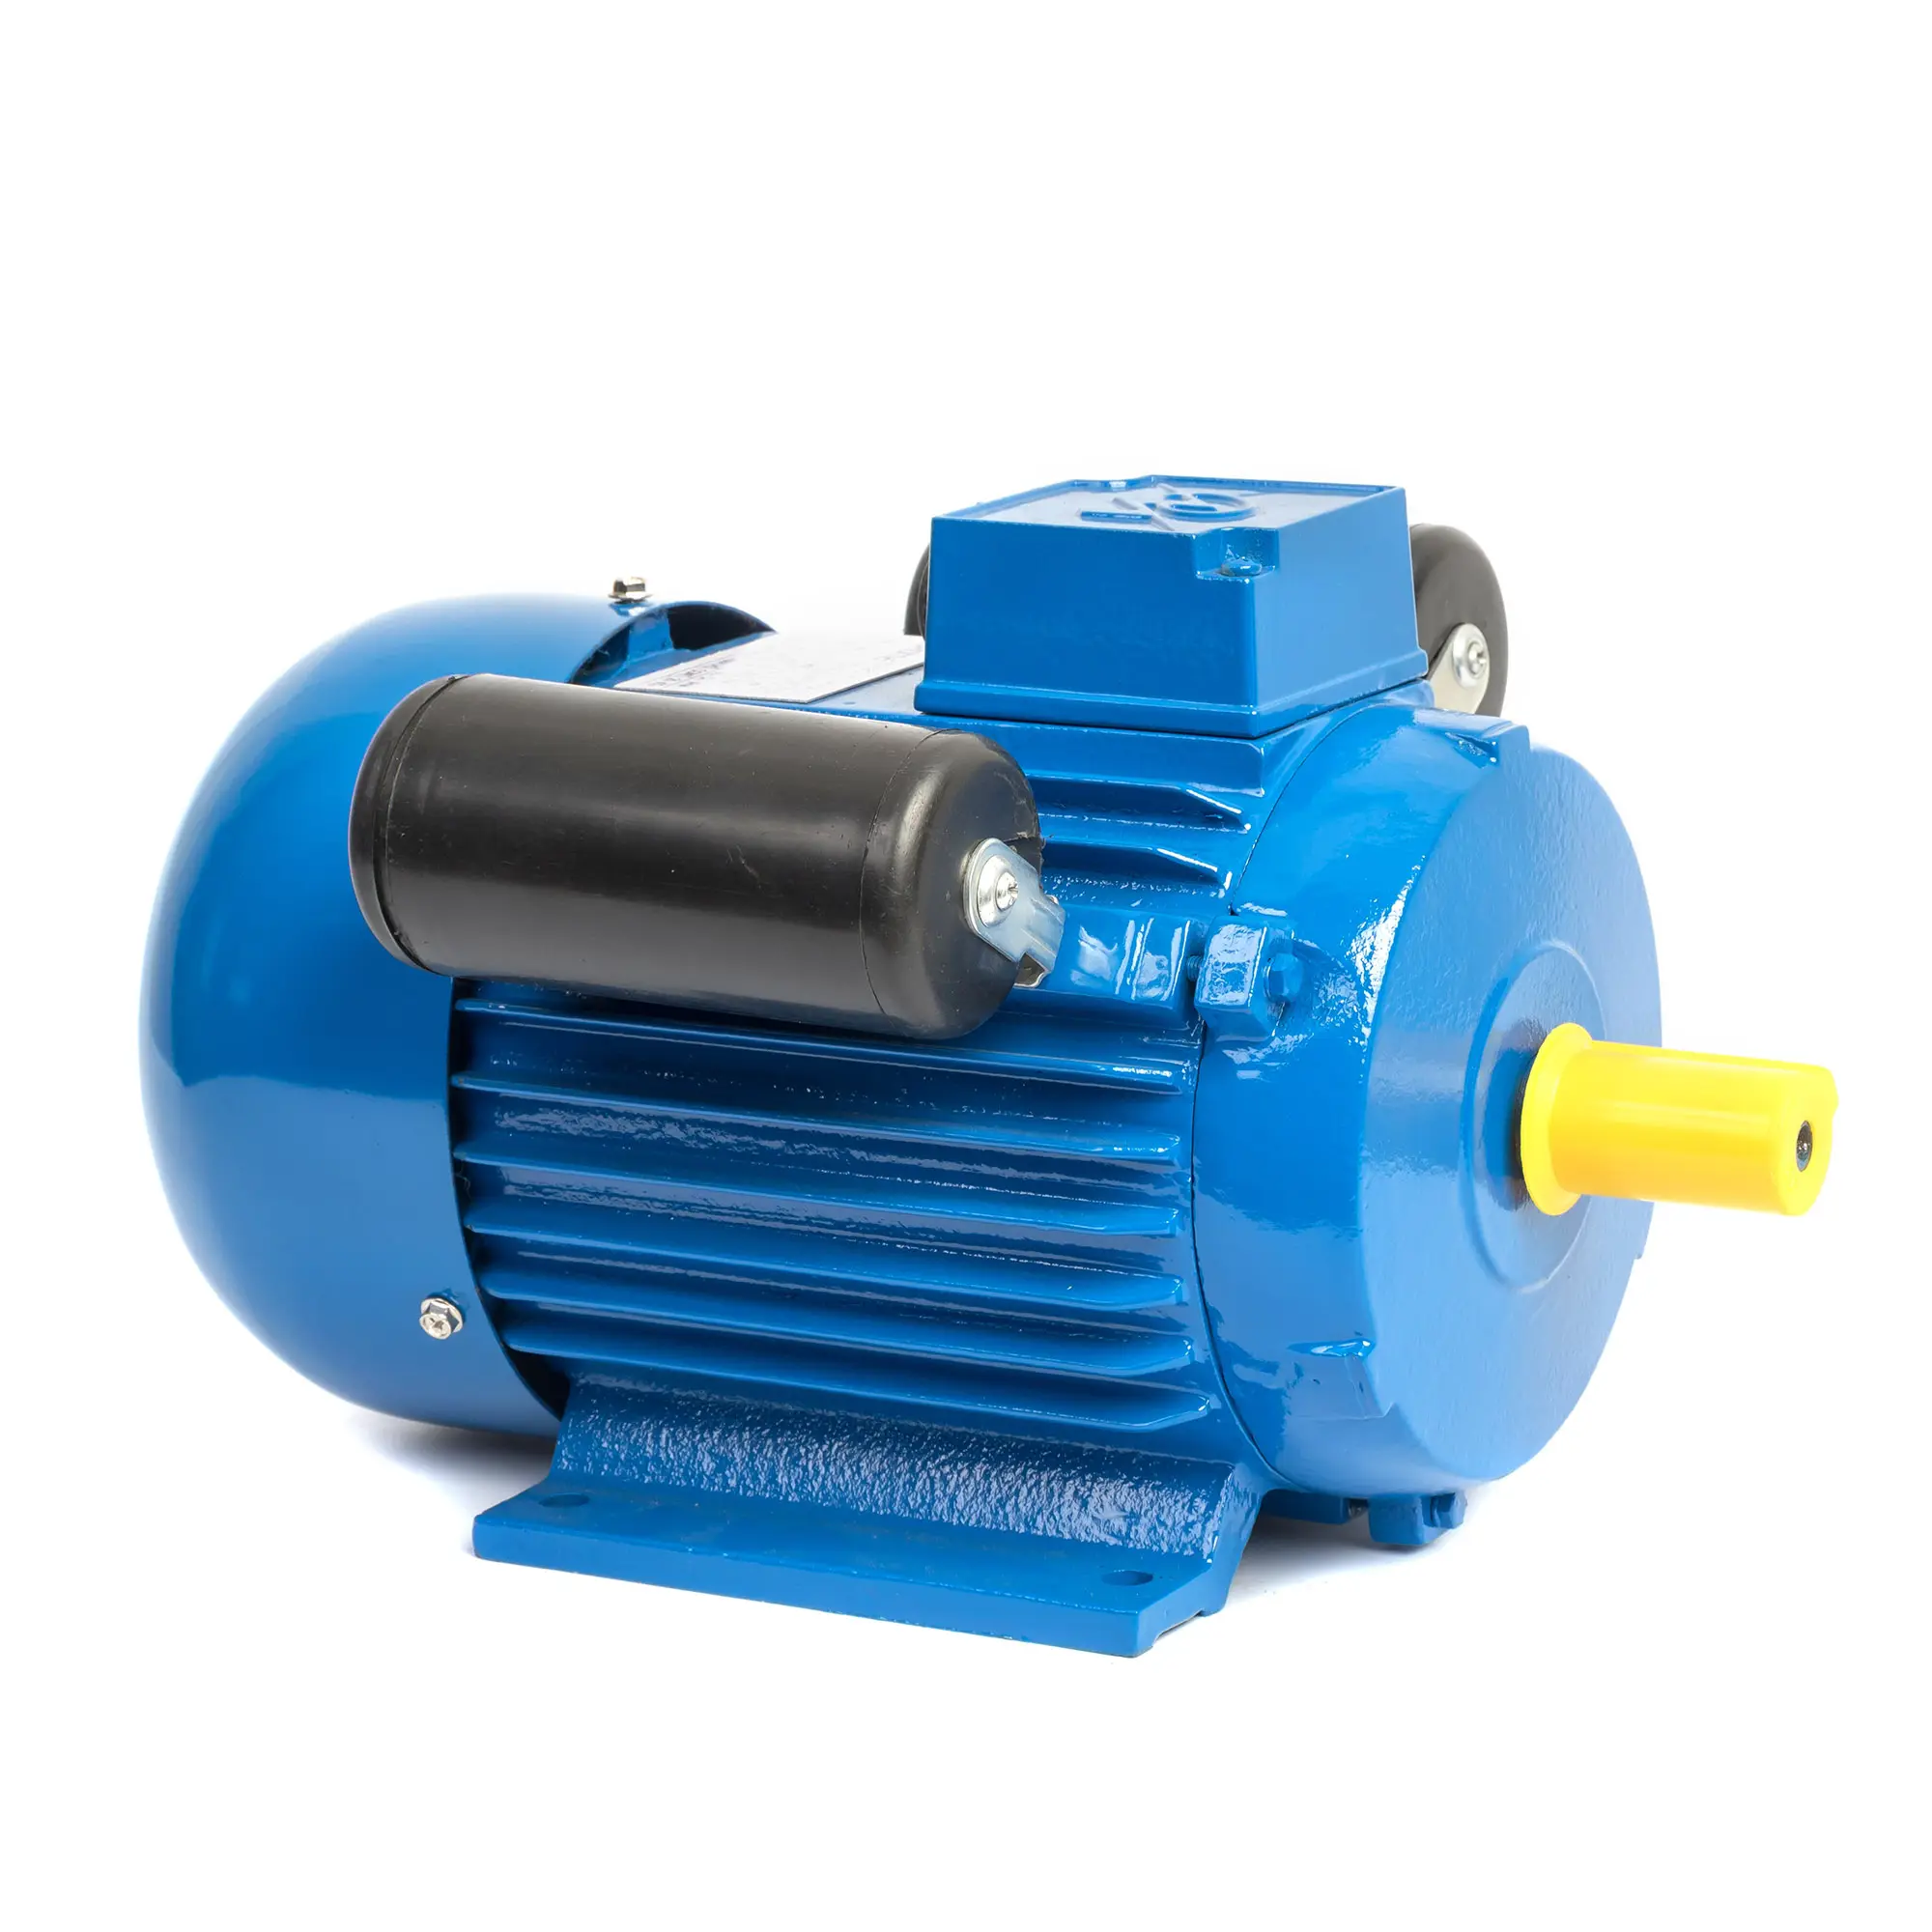 COHOME YCL 90L 2 Single Phase AC Electric Motor ROHS Feature CCC Origin Type Proof Product Protect Model Voltage